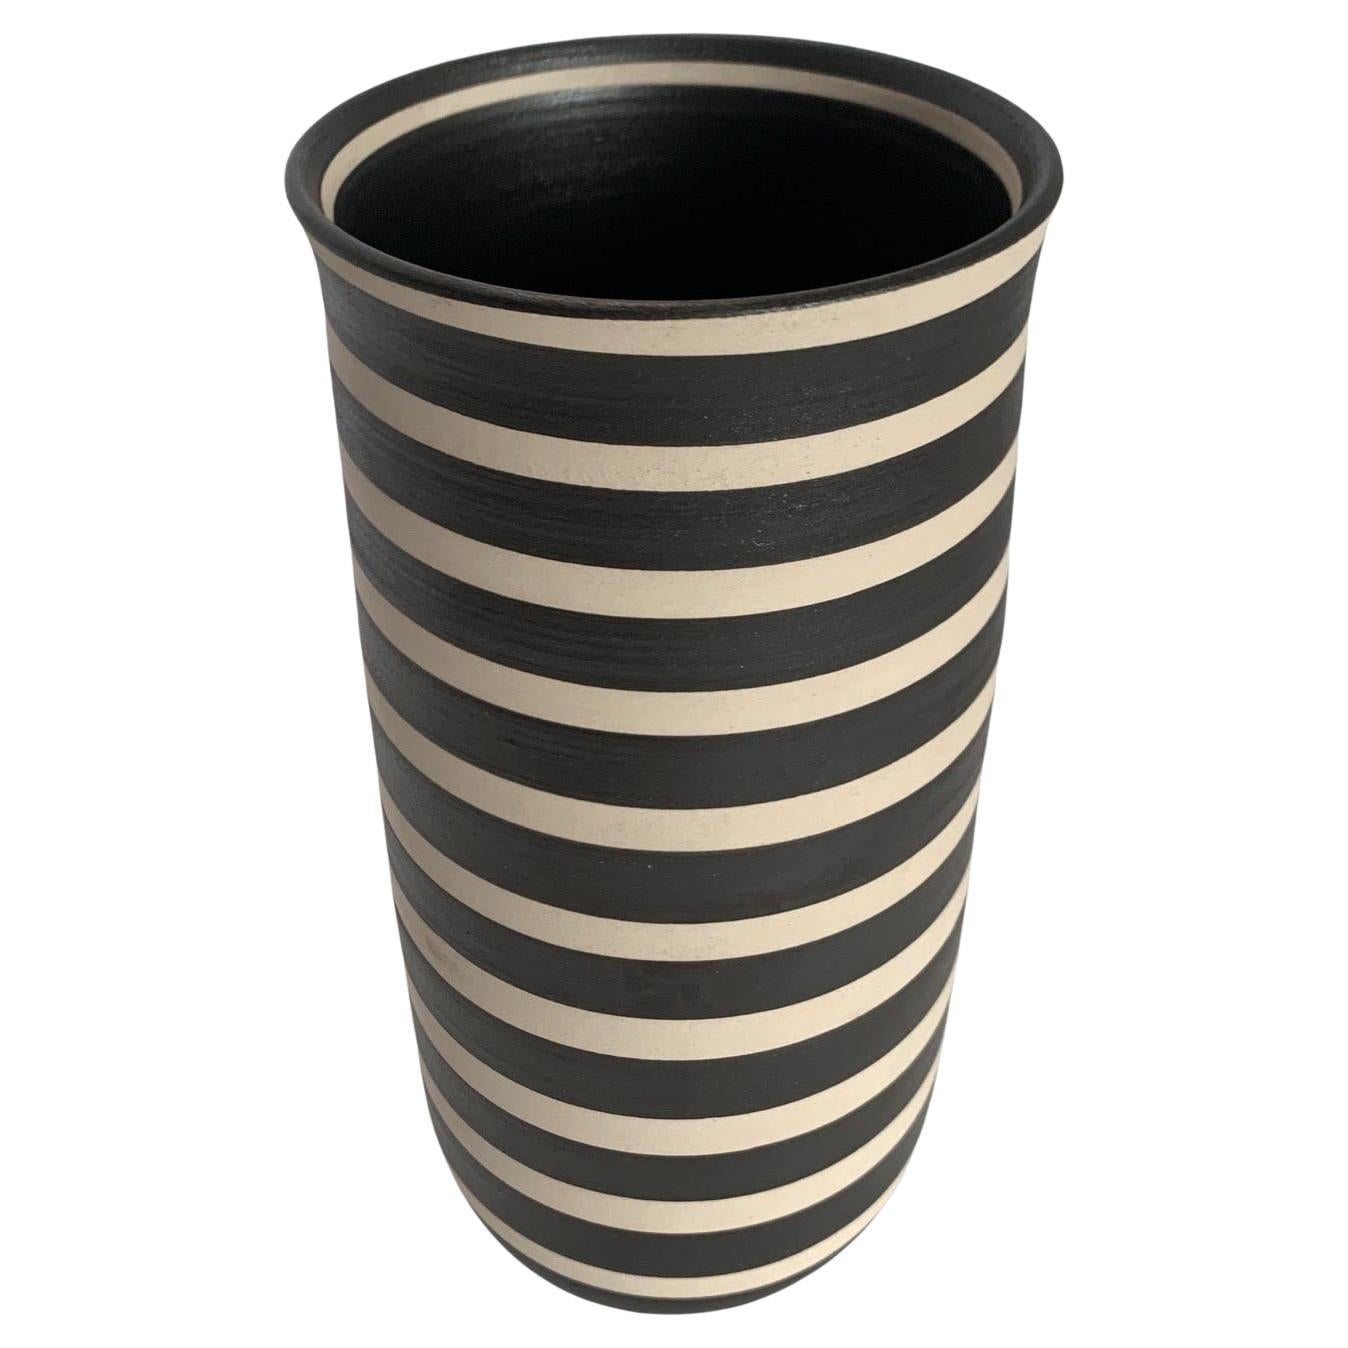 Black And Cream Tall Wide Band Stripe Vase, Turkey, Contemporary For Sale